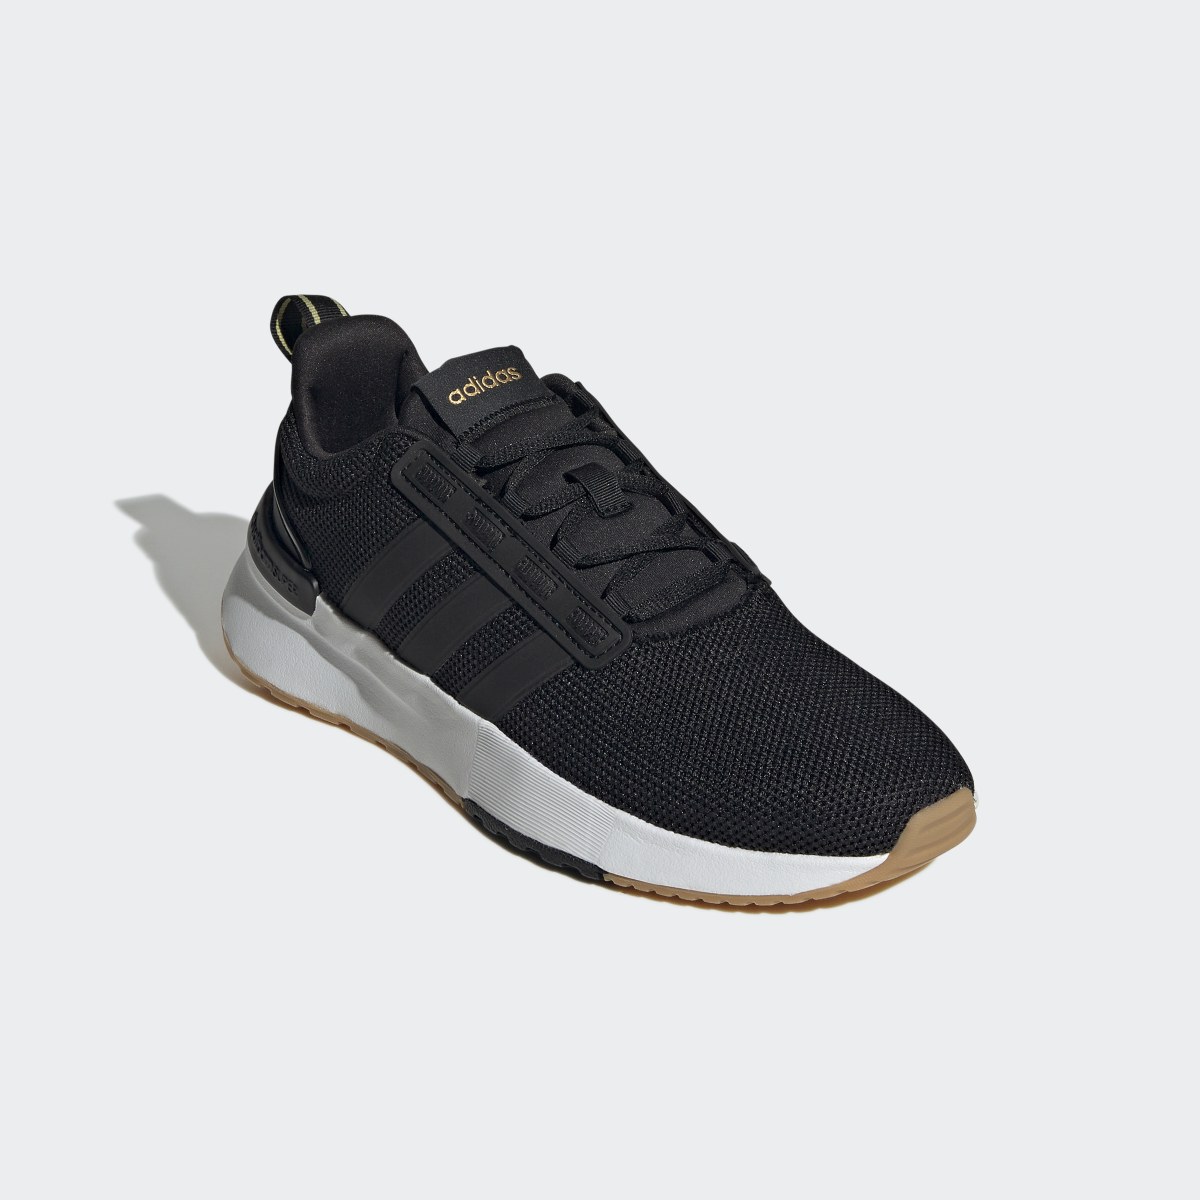 Adidas Chaussure Racer TR21. 5